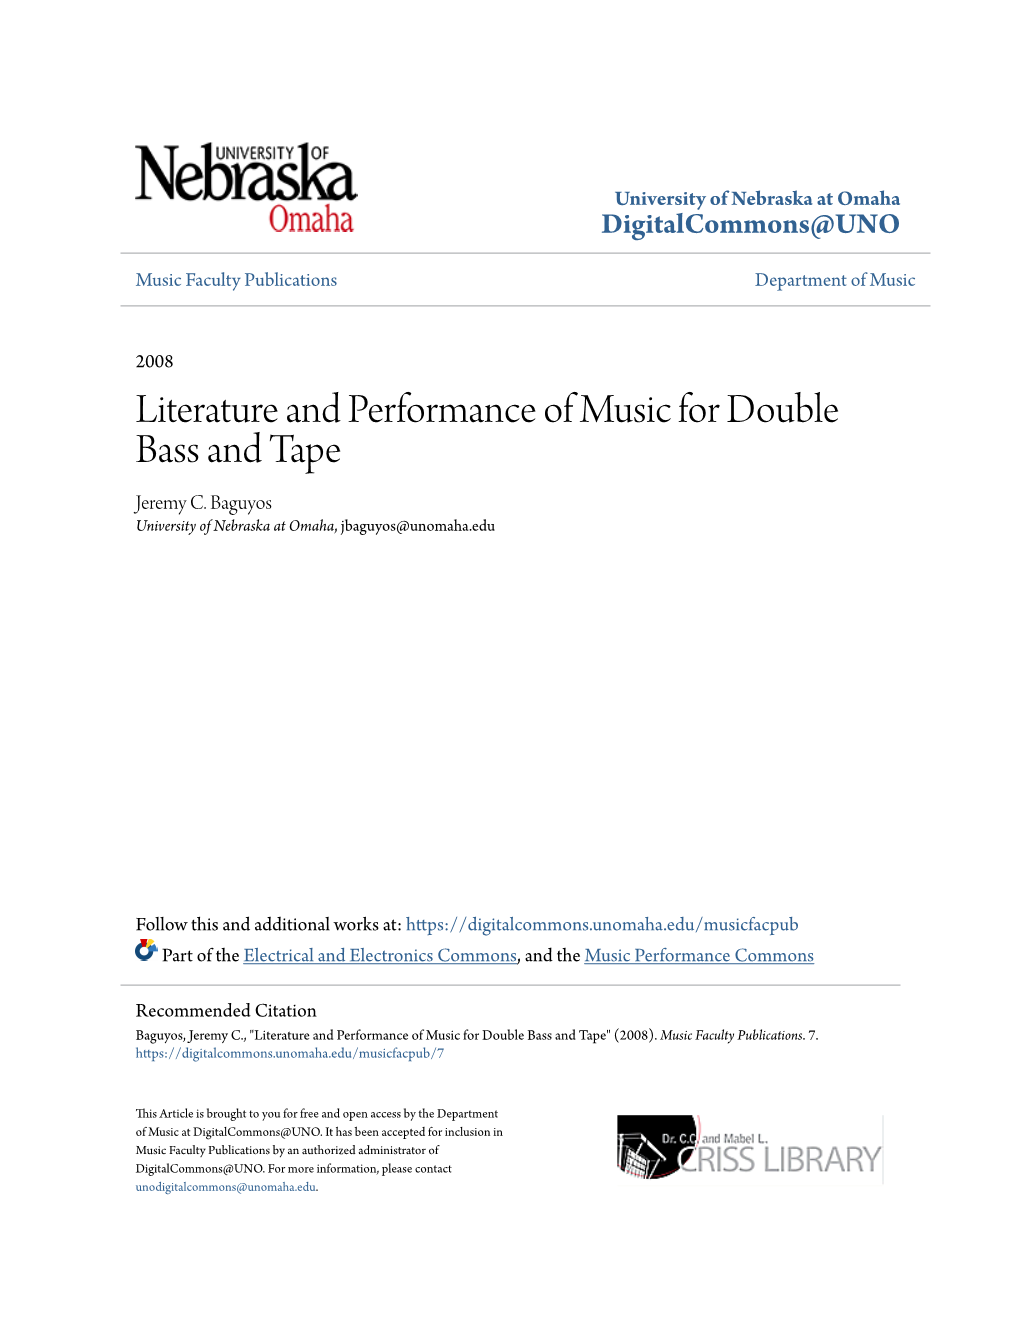 Literature and Performance of Music for Double Bass and Tape Jeremy C